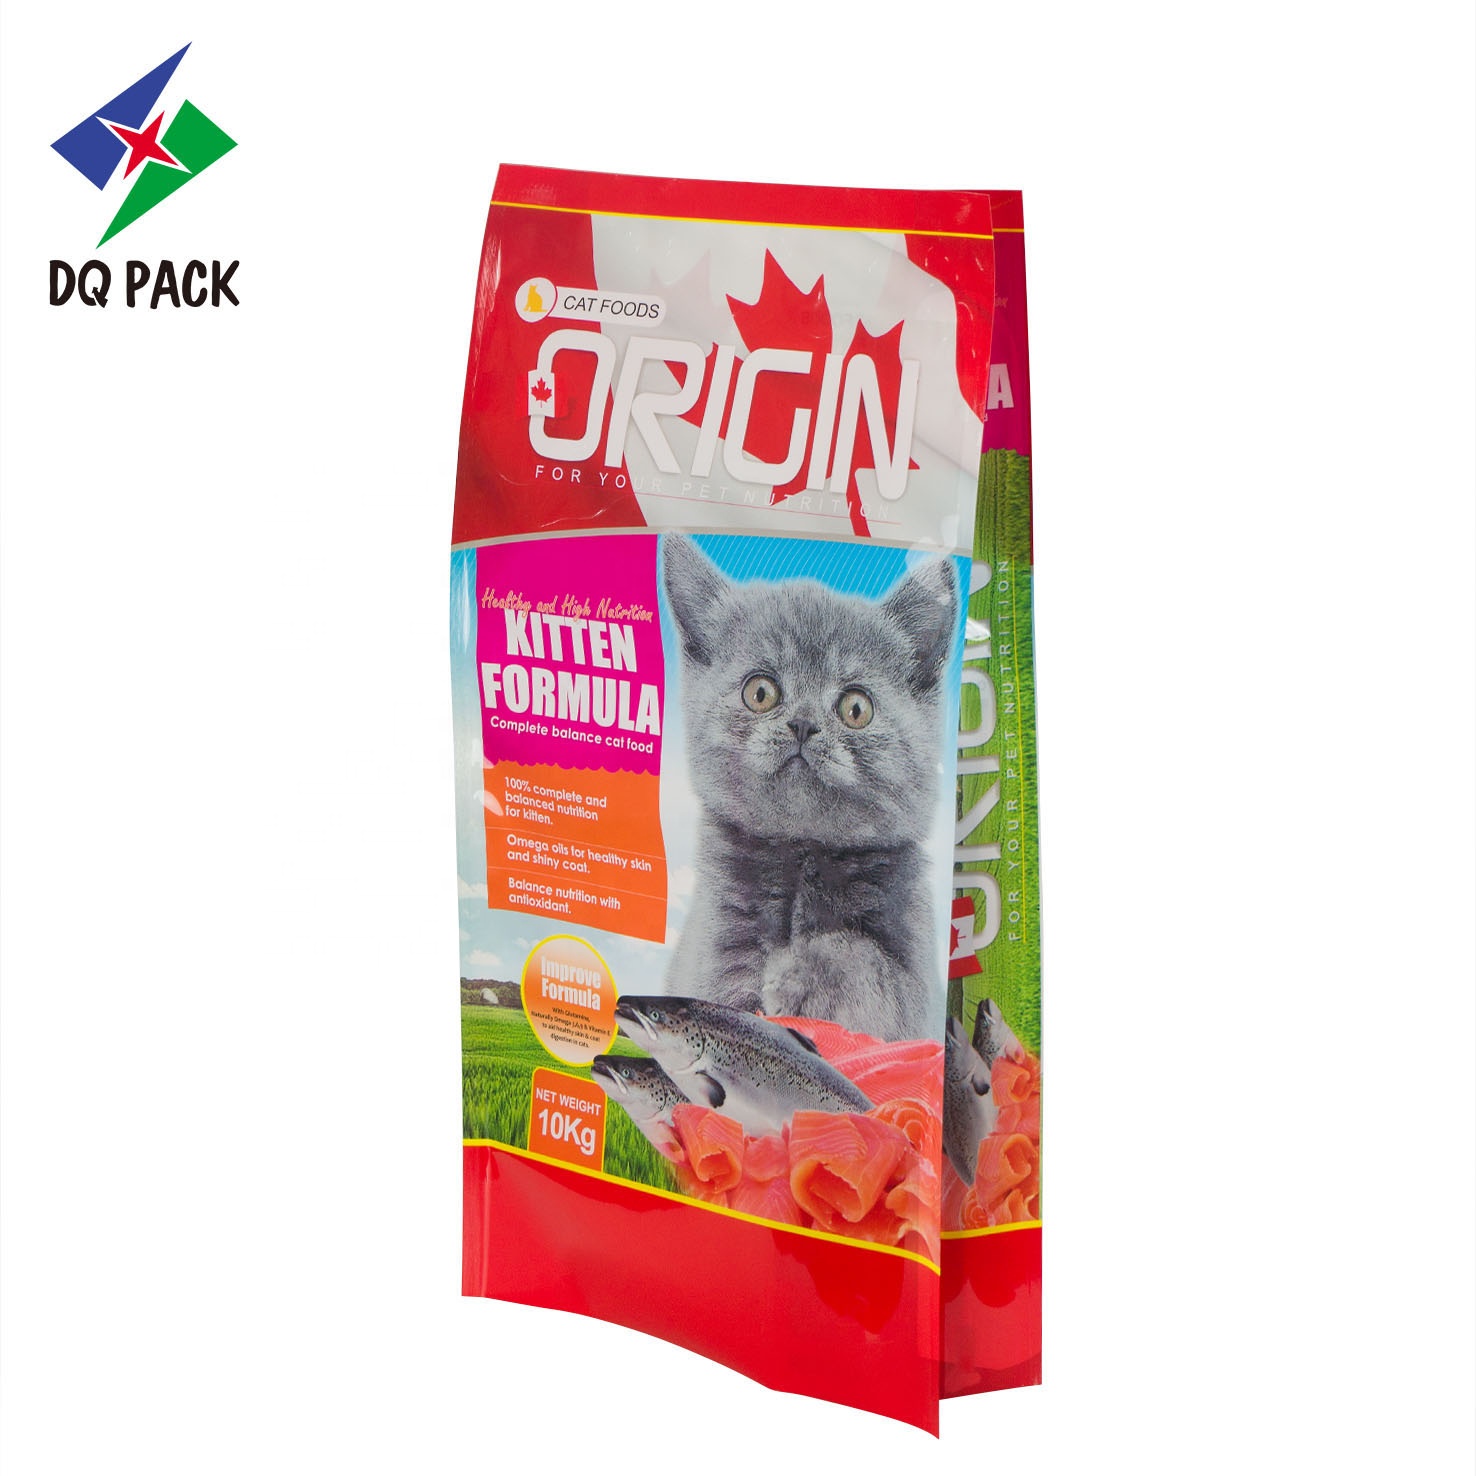 DQ PACK 4 side seal bag pet food pouch packaging bags